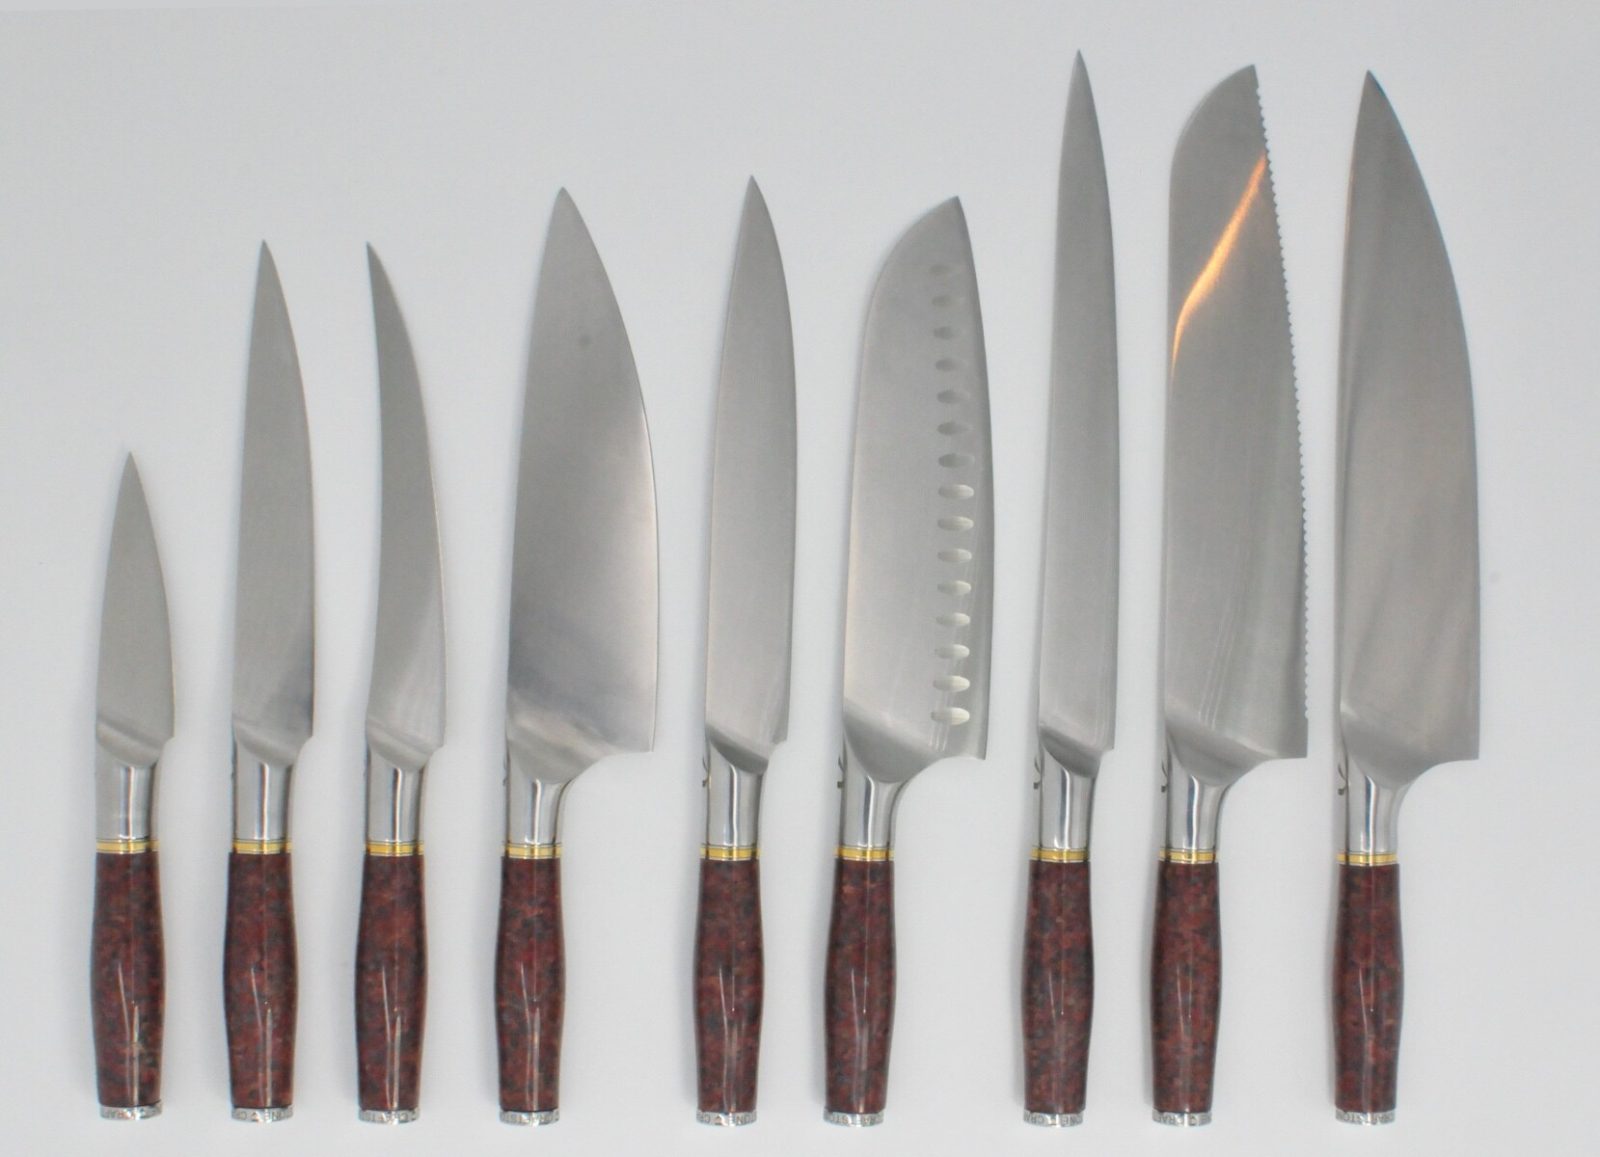 https://www.craftstoneknives.com/wp-content/uploads/2019/09/9-Knife-Set-with-a-Red-Granite-Handle-a-Garnet-Colored-Cubic-Zirconia-Stone-at-the-Back-of-the-Knife-and-Brass-and-Stainless-Steel-Decorative-Rings.jpg